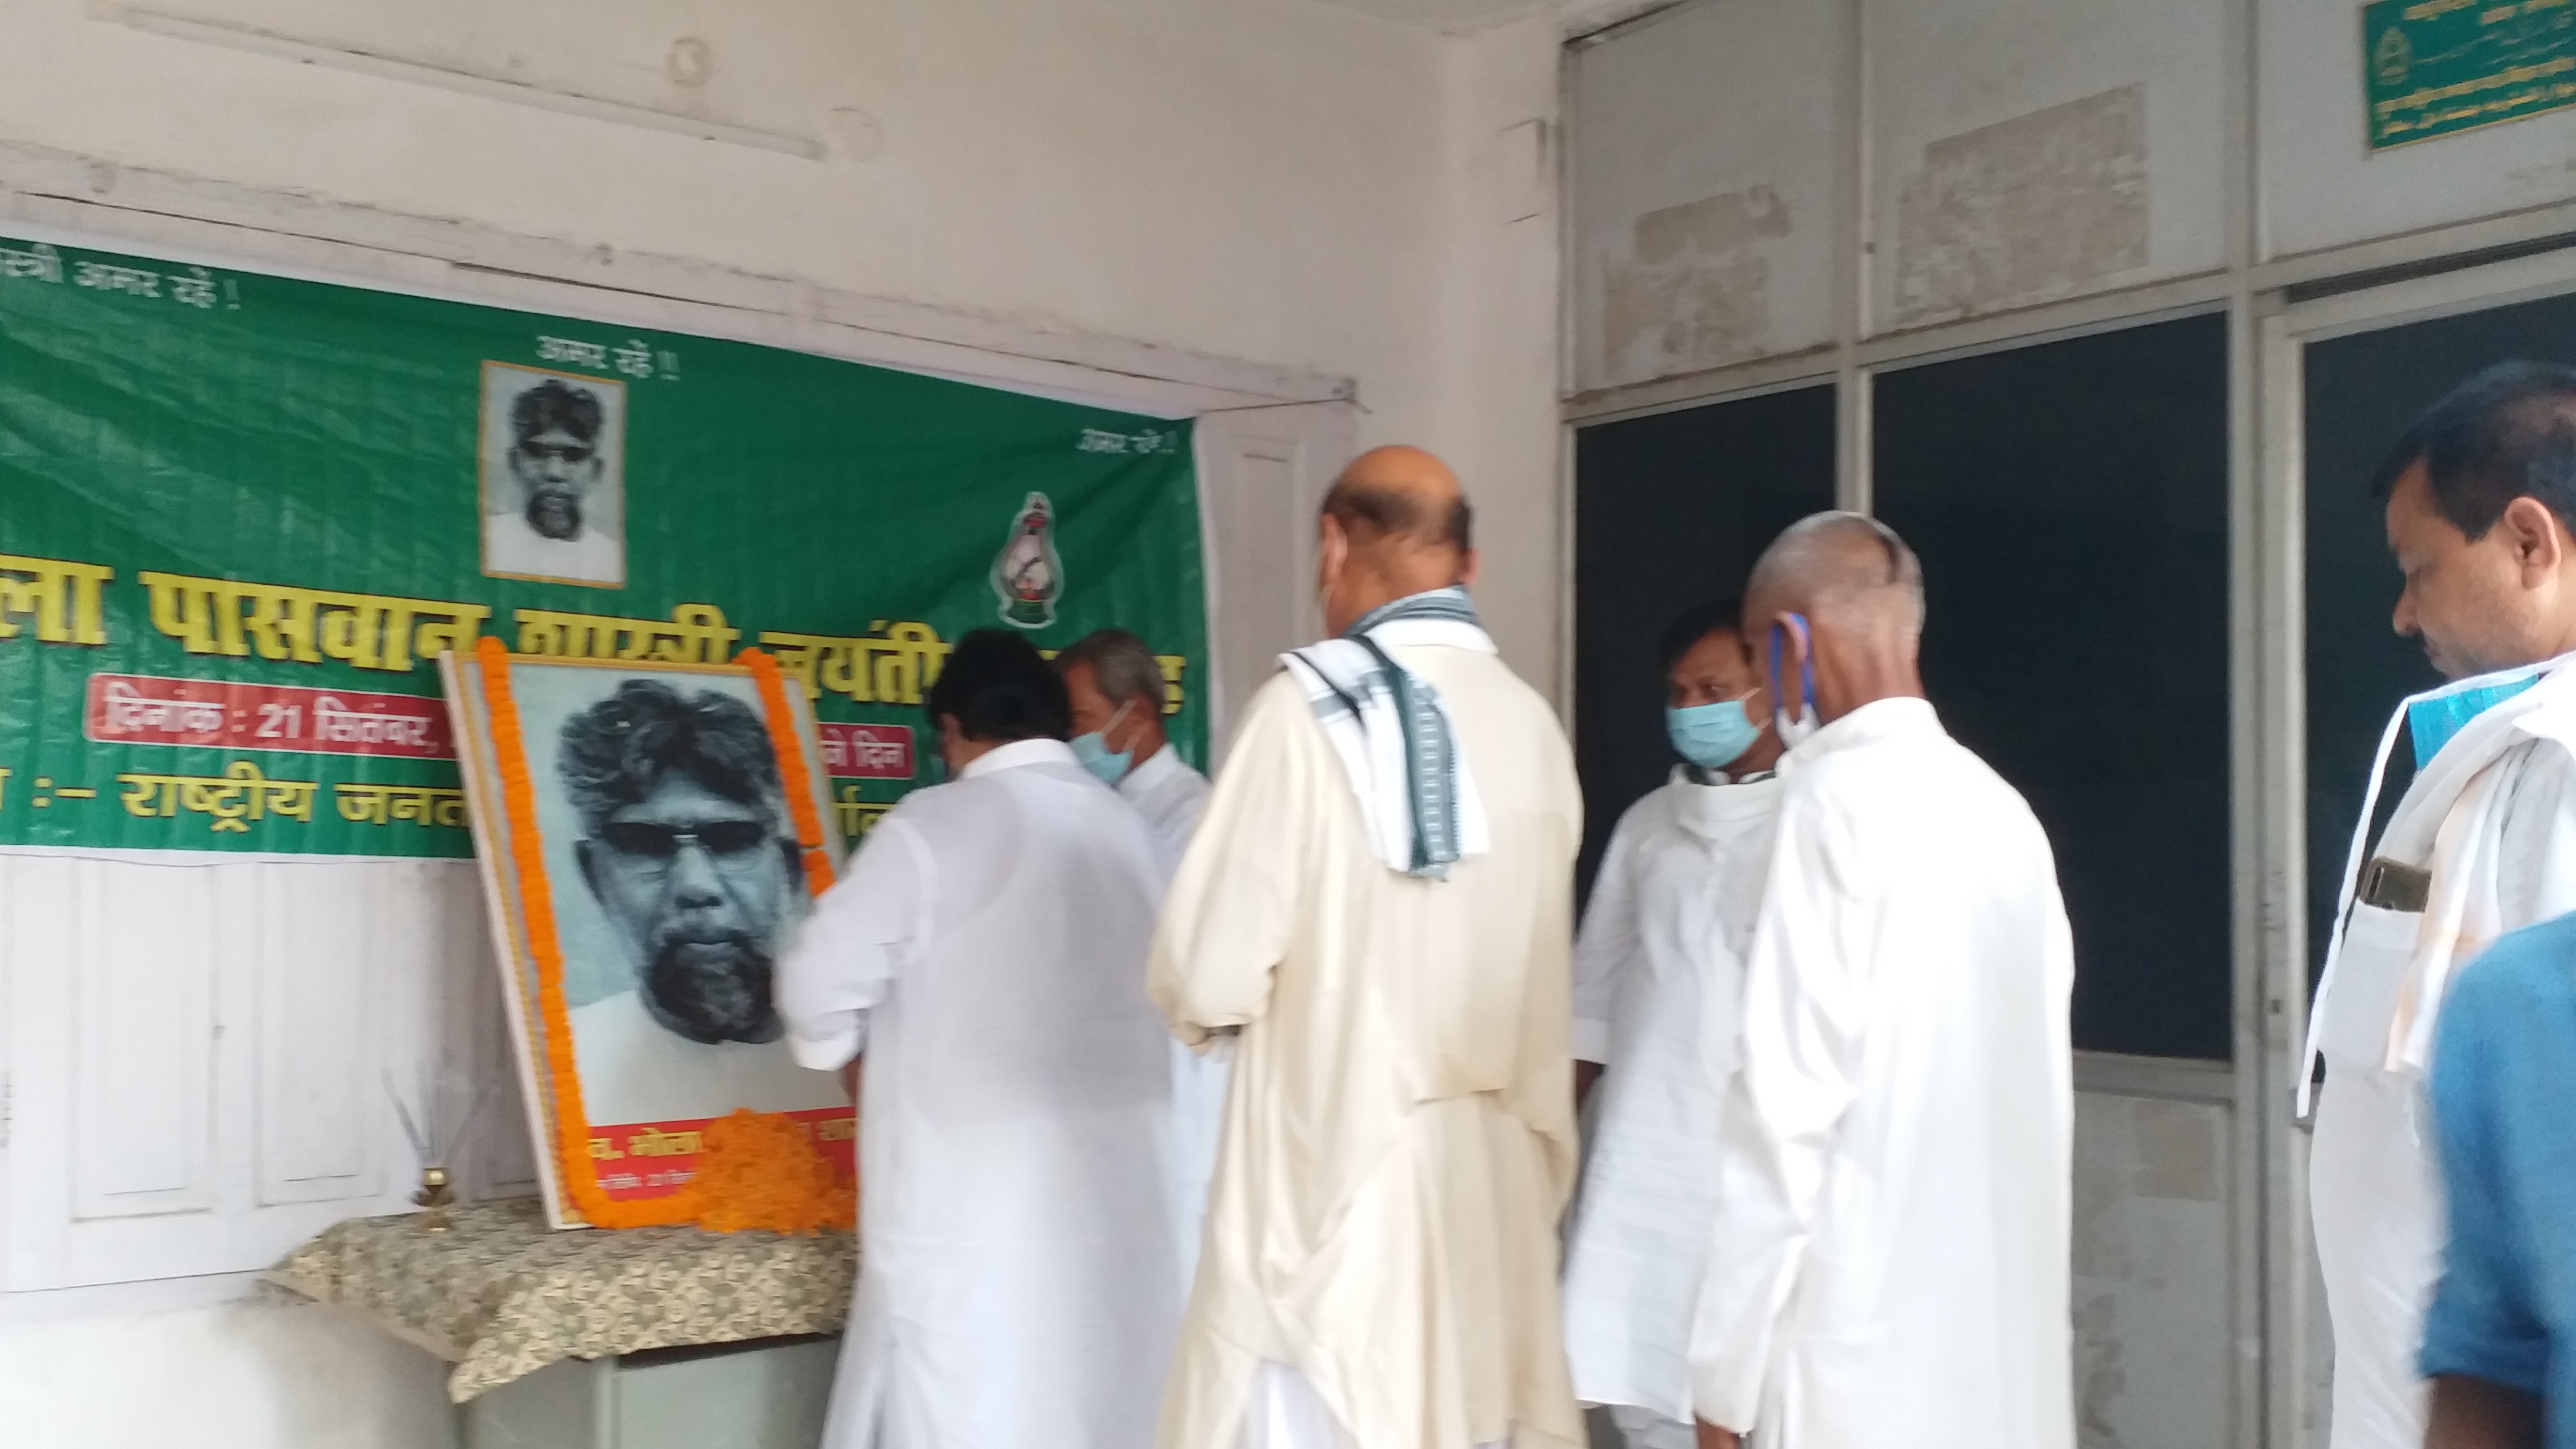 Birth anniversary of former Chief Minister Bhola Paswan Shastri celebrated in RJD office